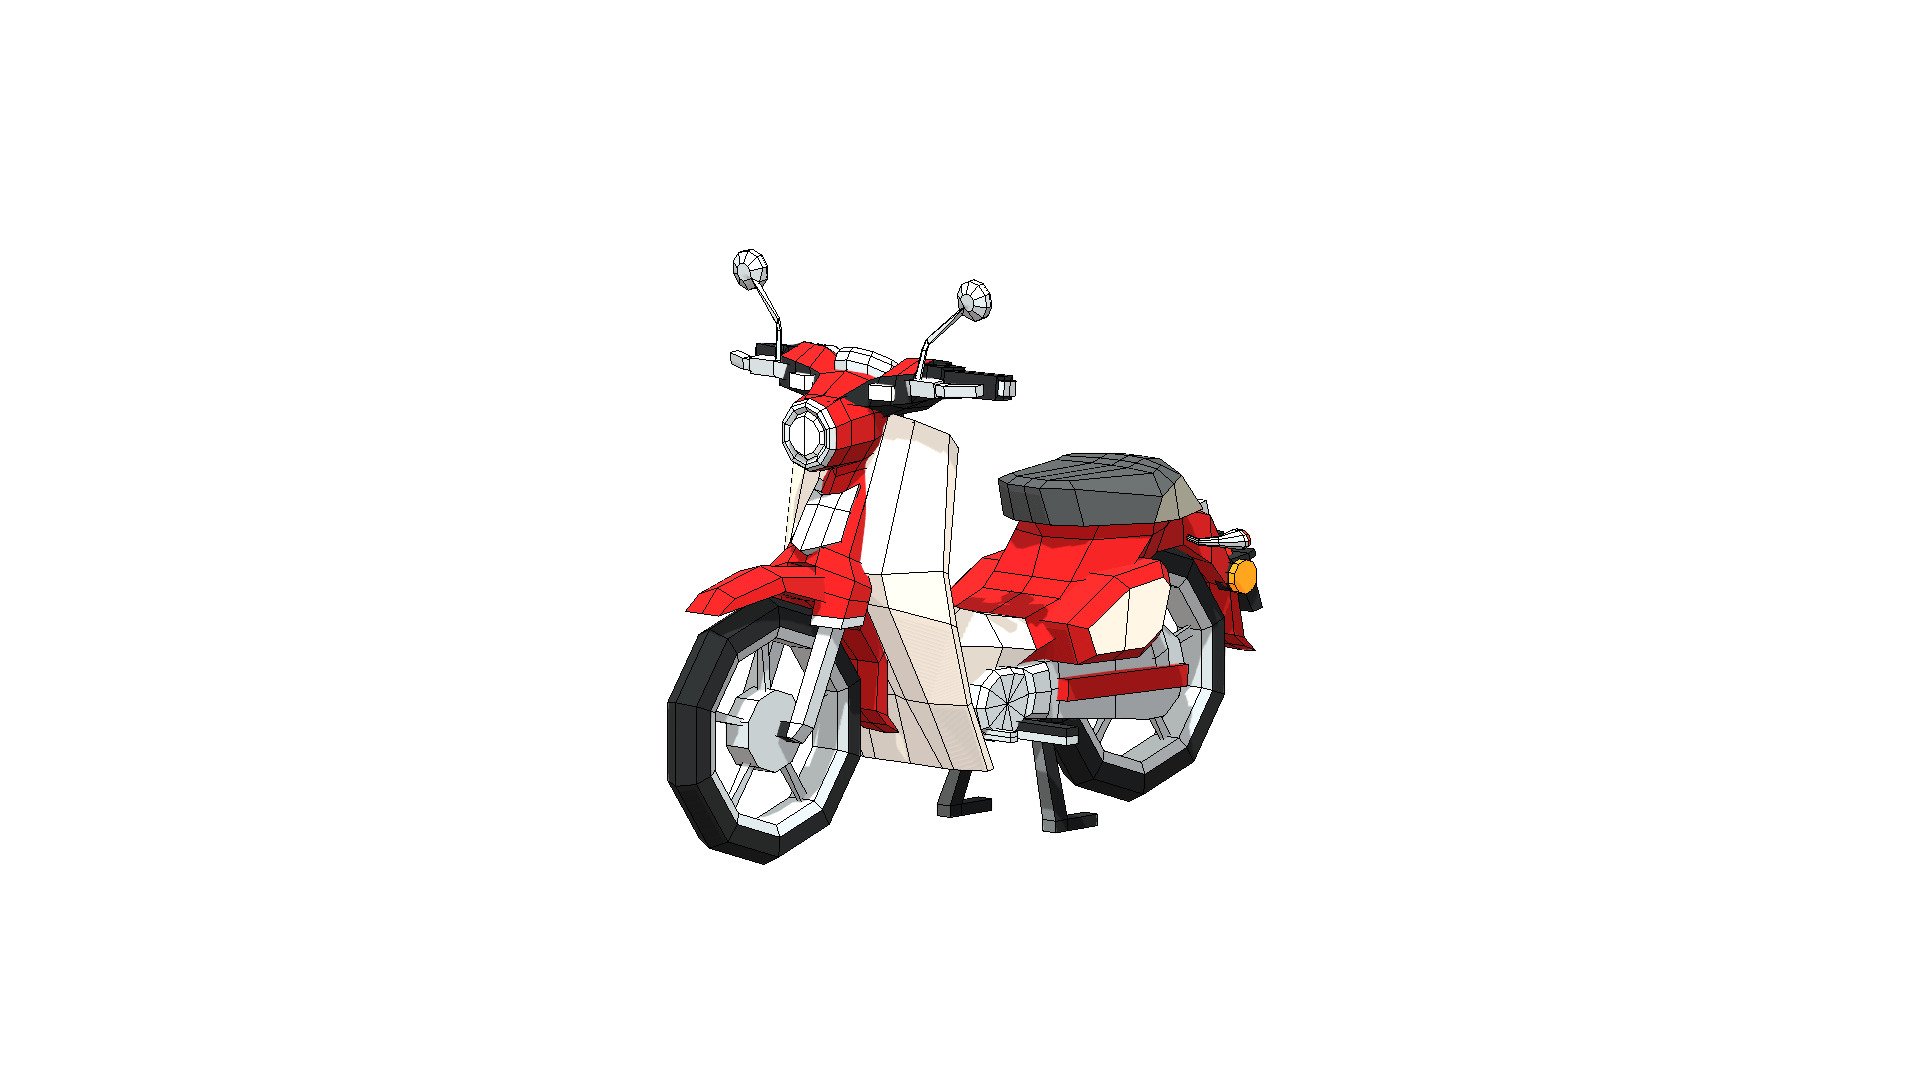 Another bike I like :V - Low Poly Honda Super Cub - 3D model by nnneato 3d model